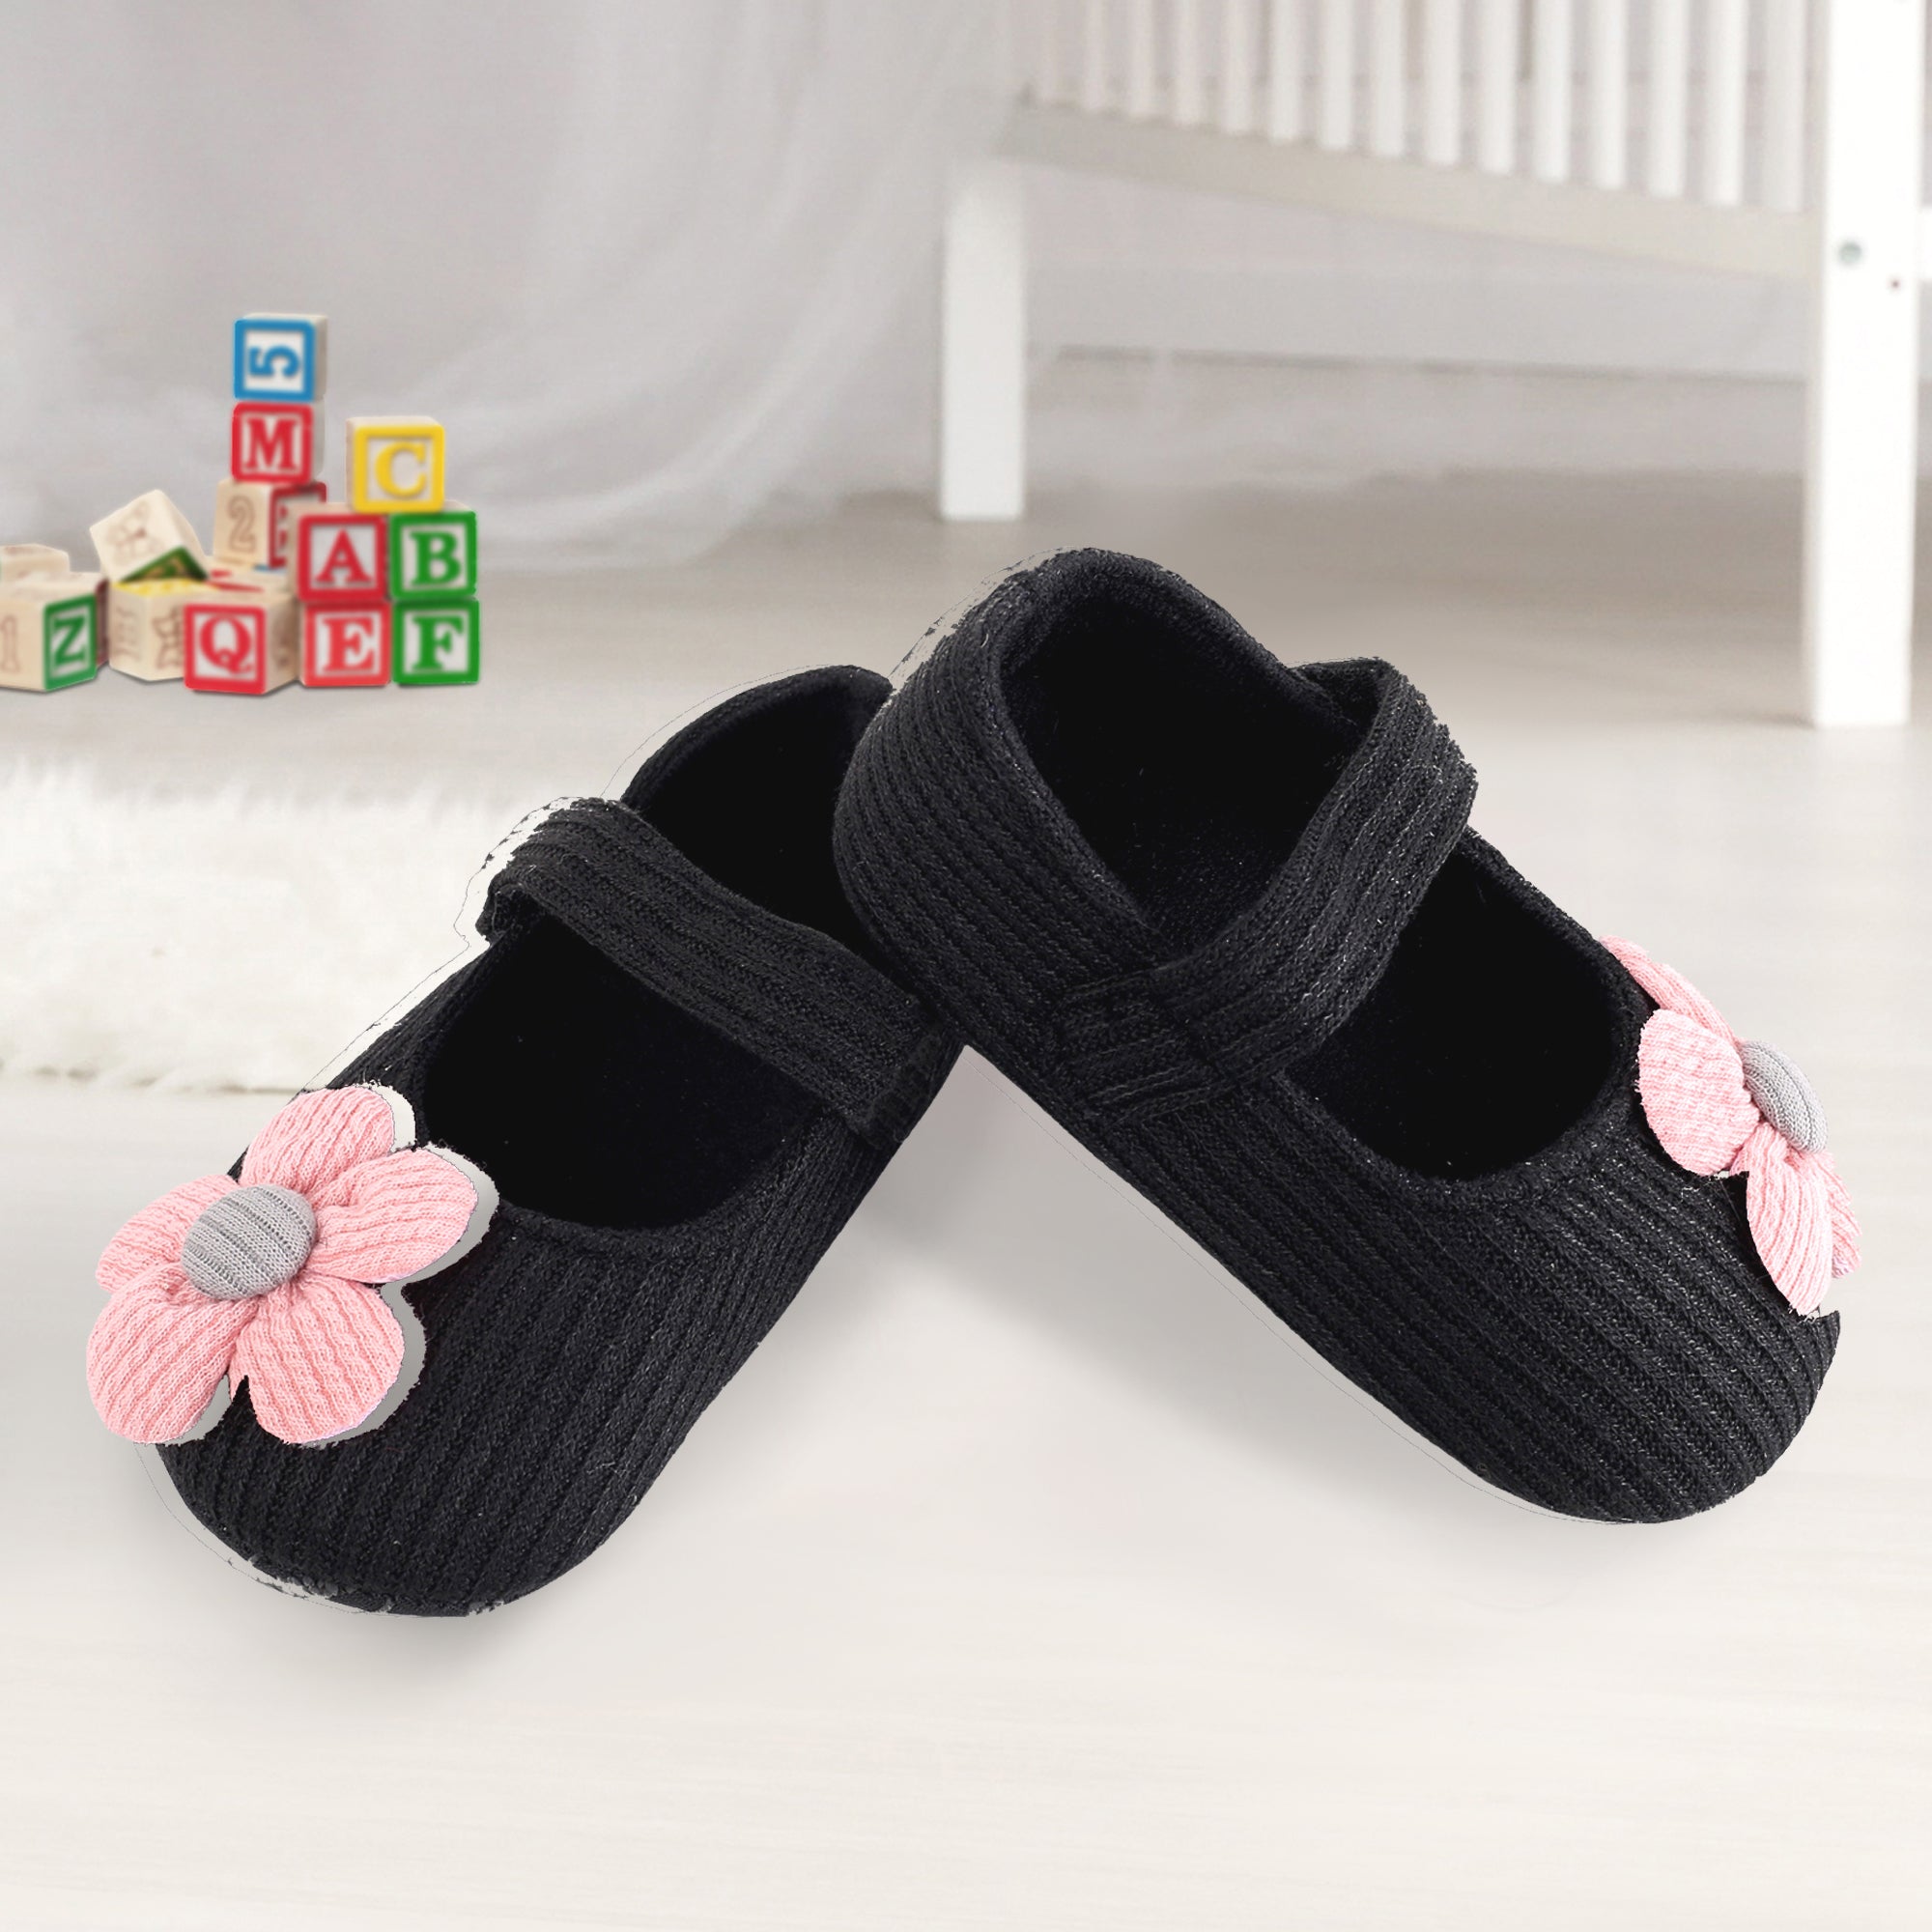 Baby Moo Floral Applique Black And Pink Booties